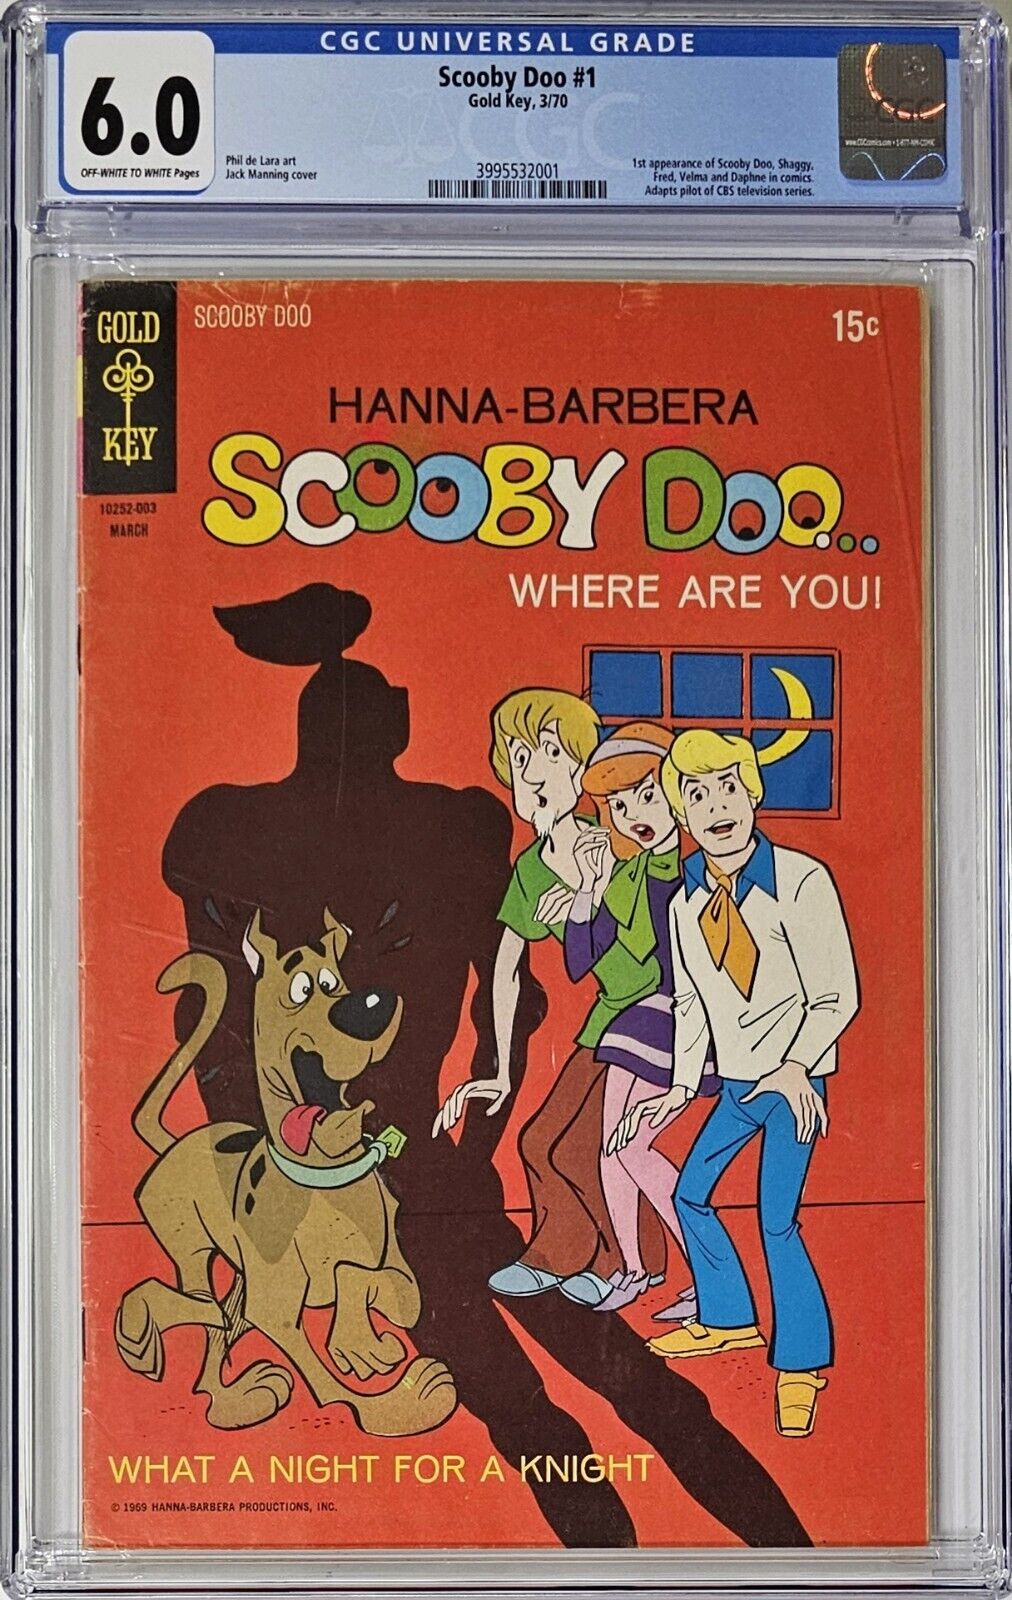 Scooby Doo #1 CGC 6.0 Gold Key 1970 1st Appearance of Scooby Doo